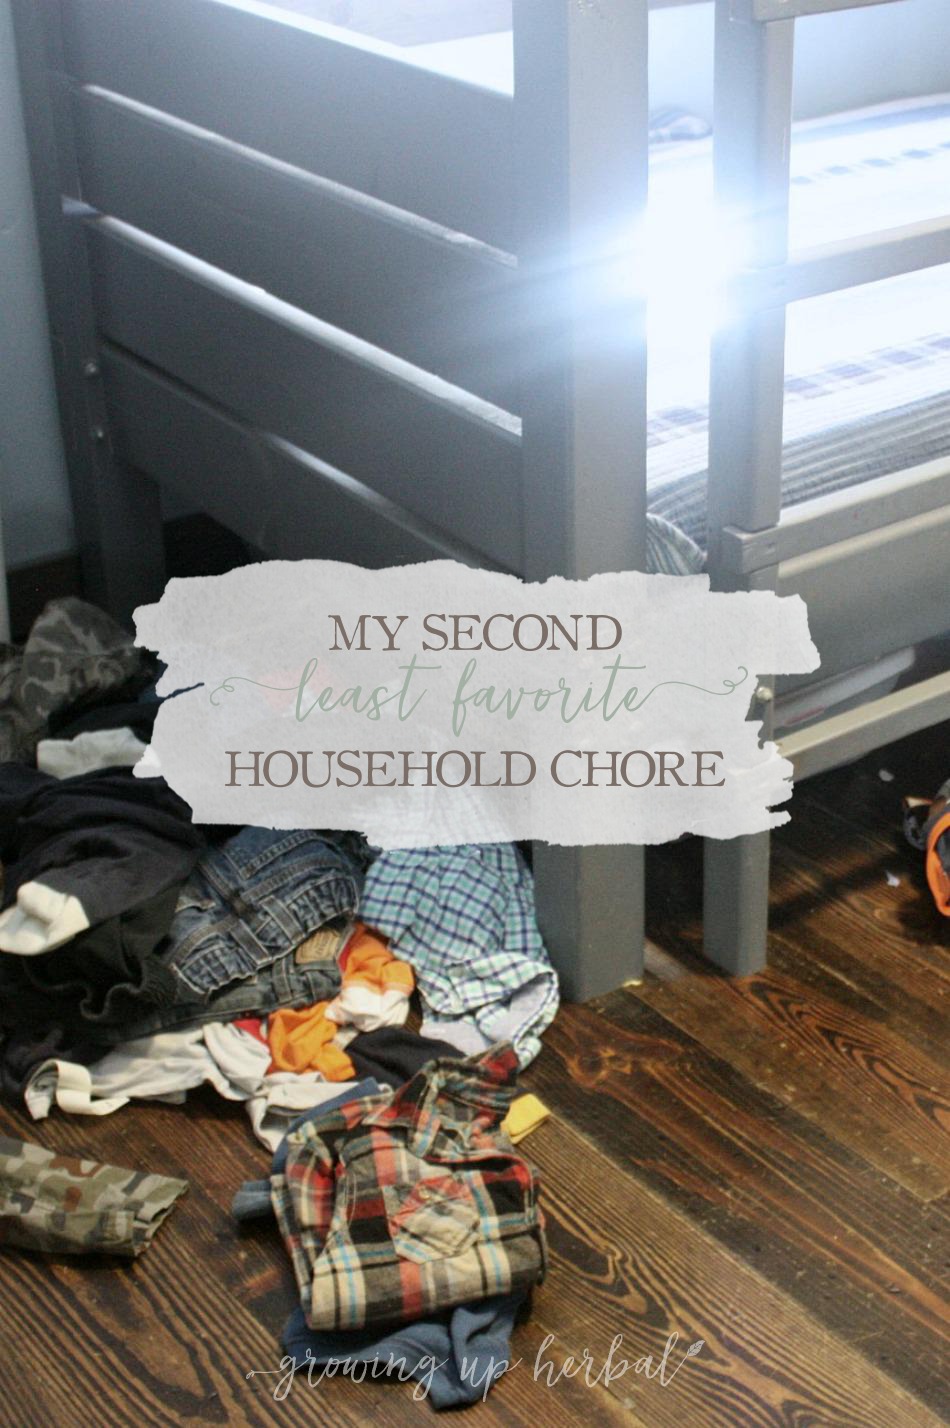 My Second Least-Favorite Household Chore | Growing Up Herbal | This is why we sometimes wear wrinkled clothes. What's your least favorite household chore?